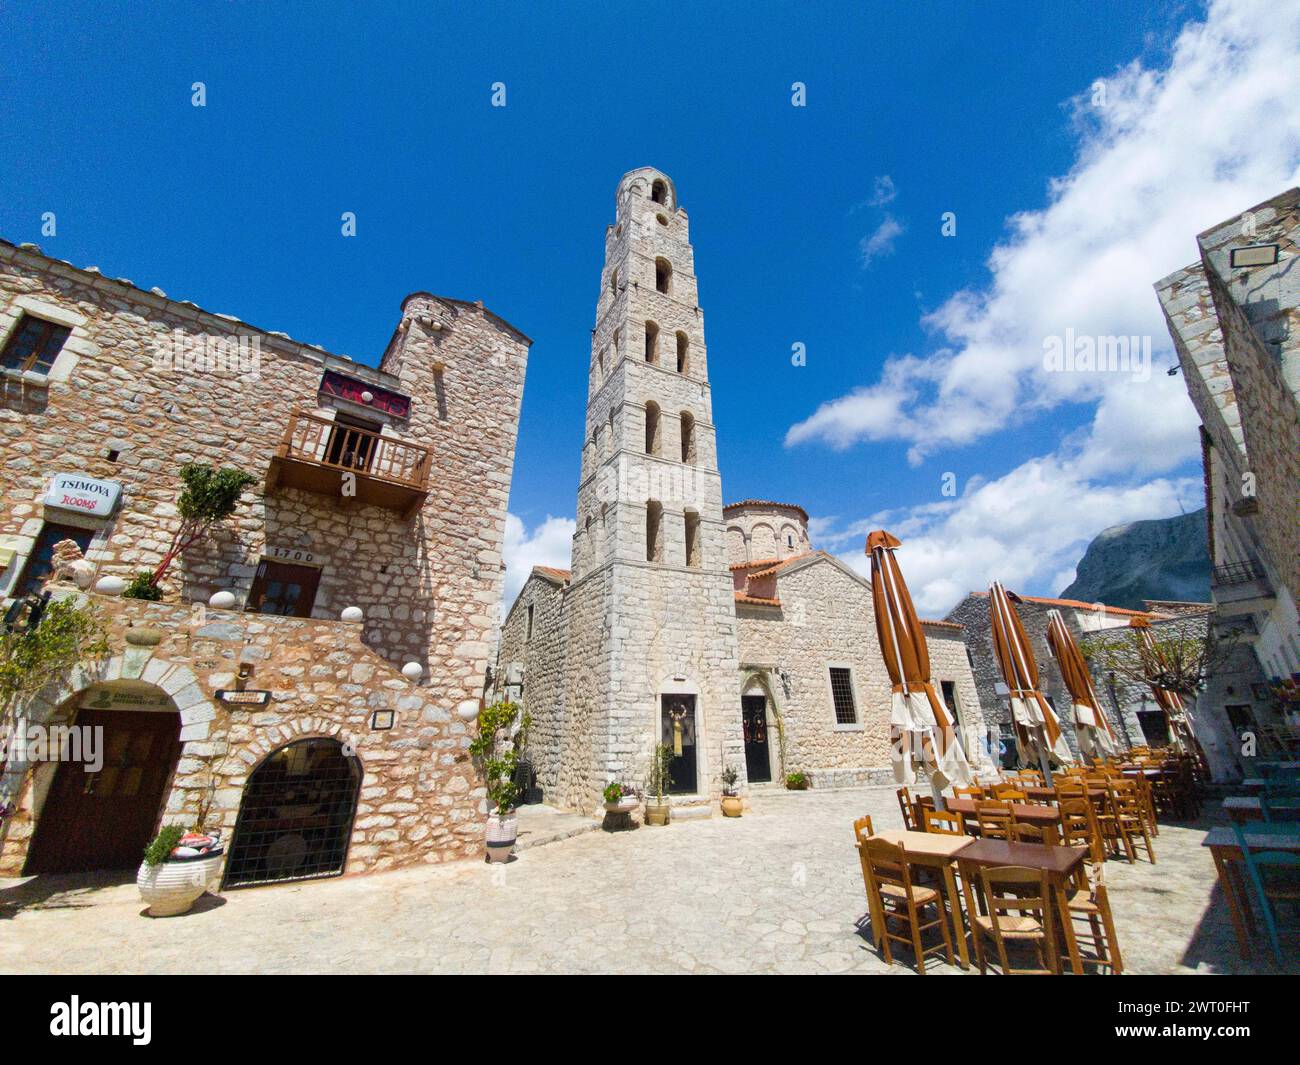 Old stone tower in a square with open parasols and blue sky, Taxiarchis Church, Old Town, Areopoli, Areopolis, Tsimova, Itylo, Anatoliki Mani, Mani Stock Photo